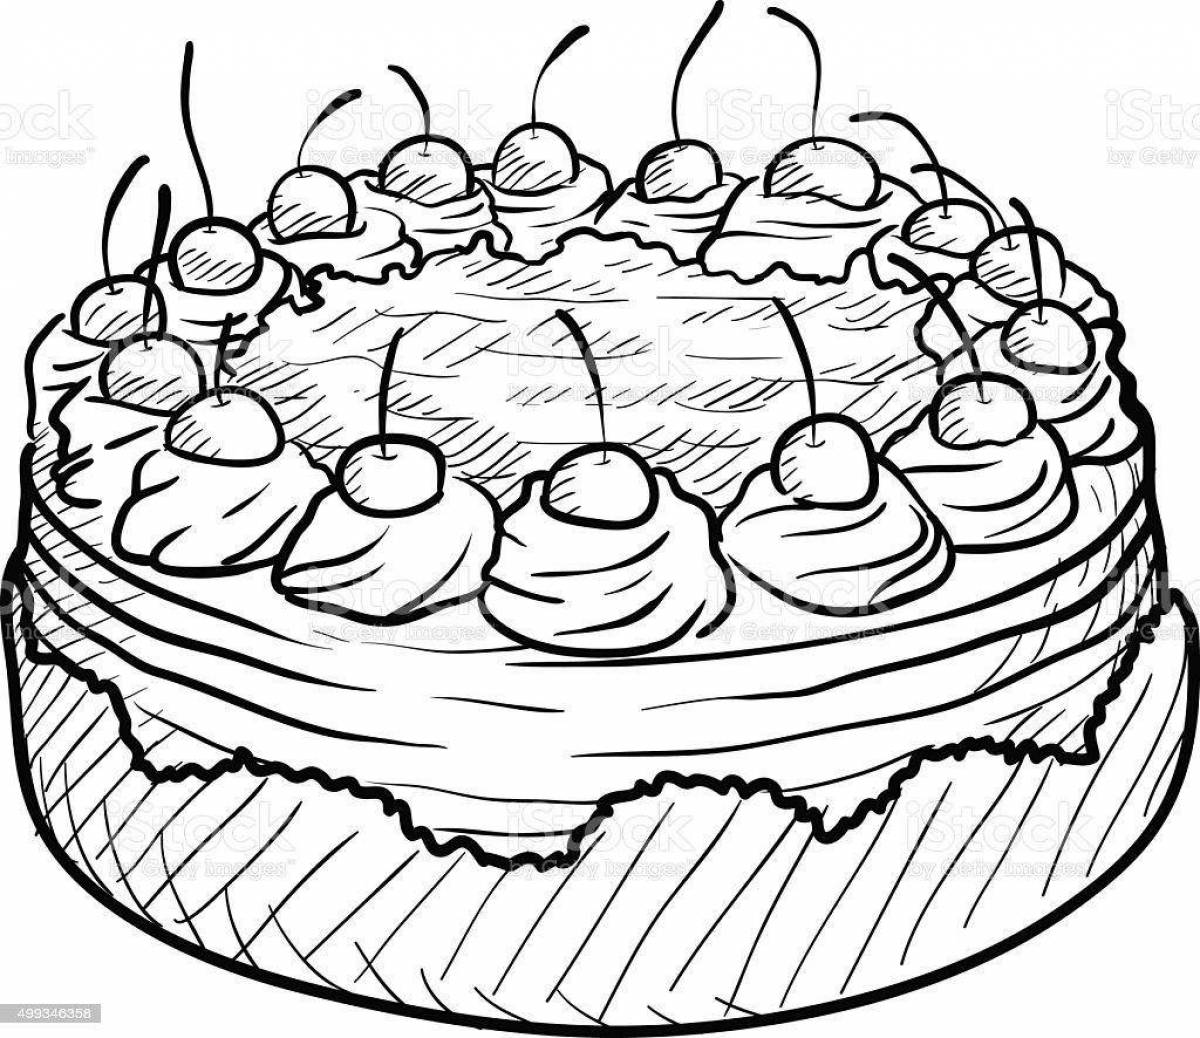 Coloring page delicious chocolate cake